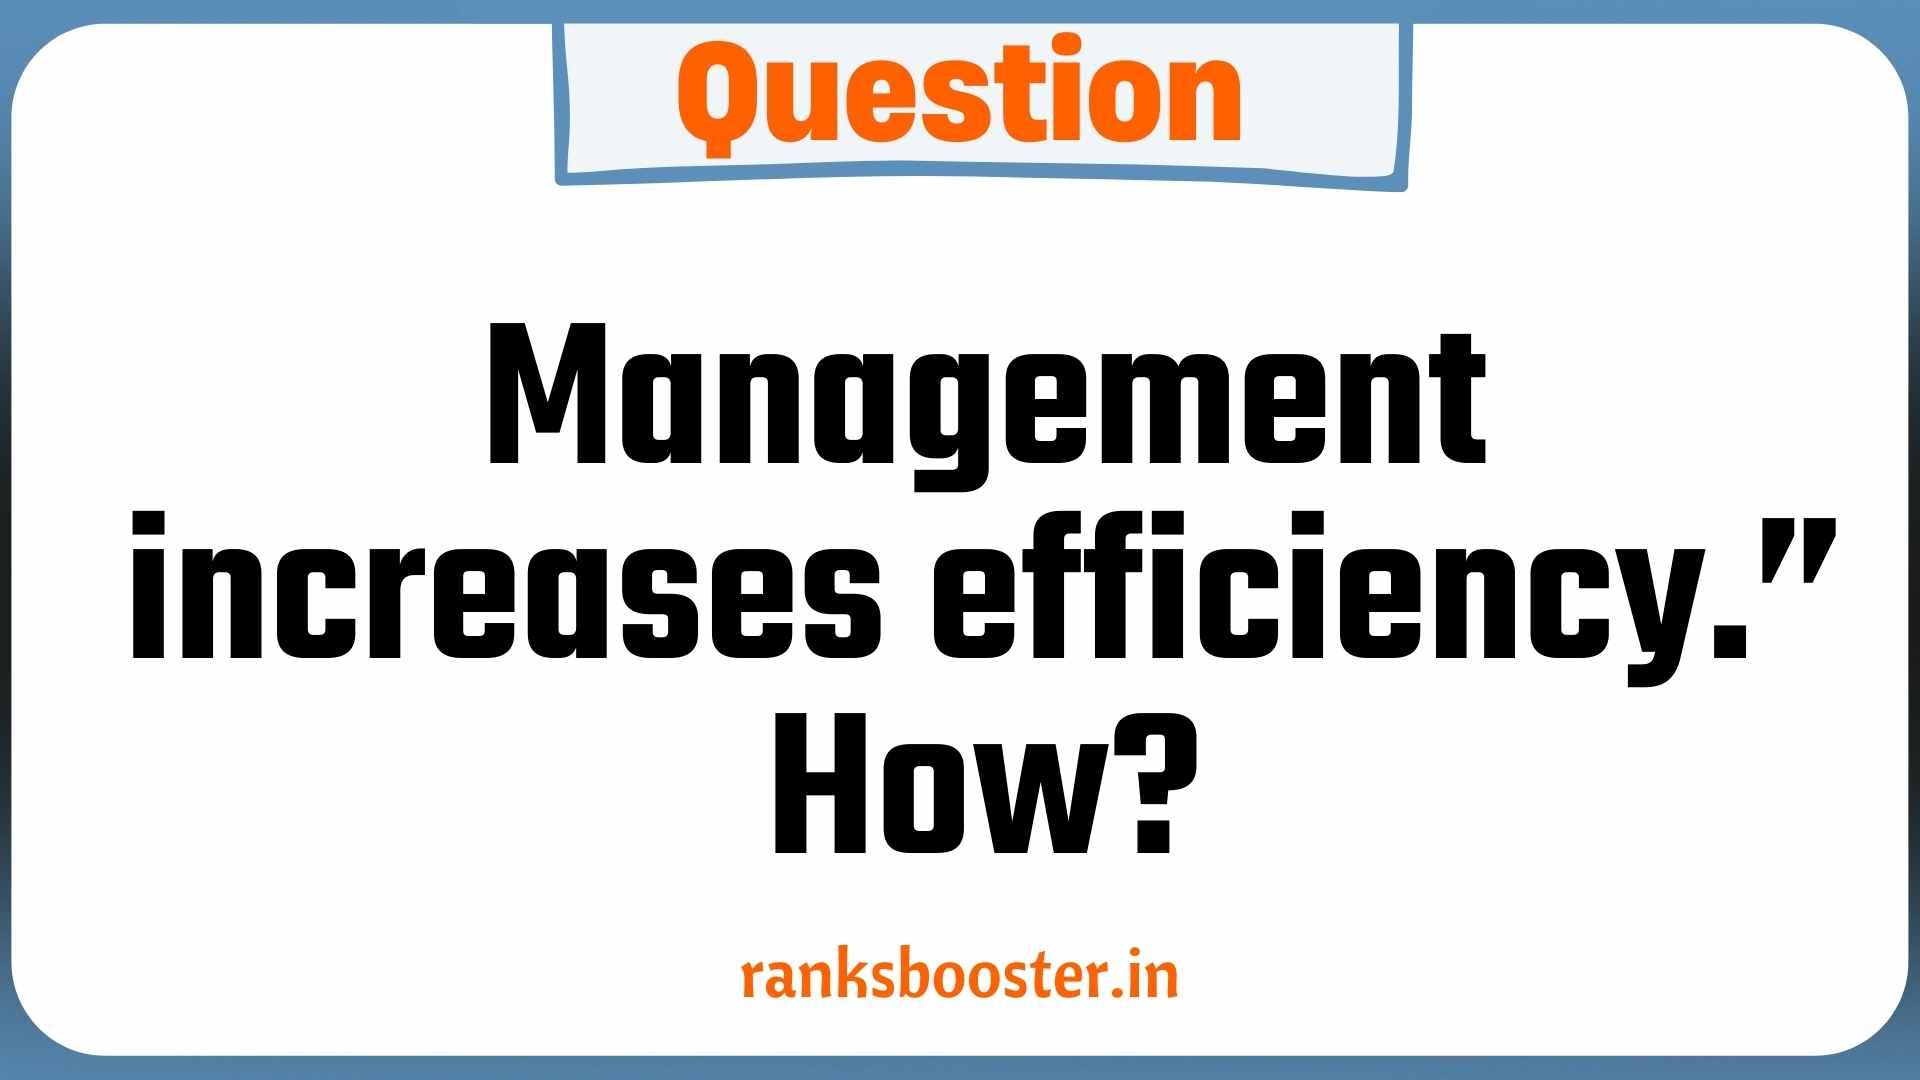 “Management increases efficiency.” How?